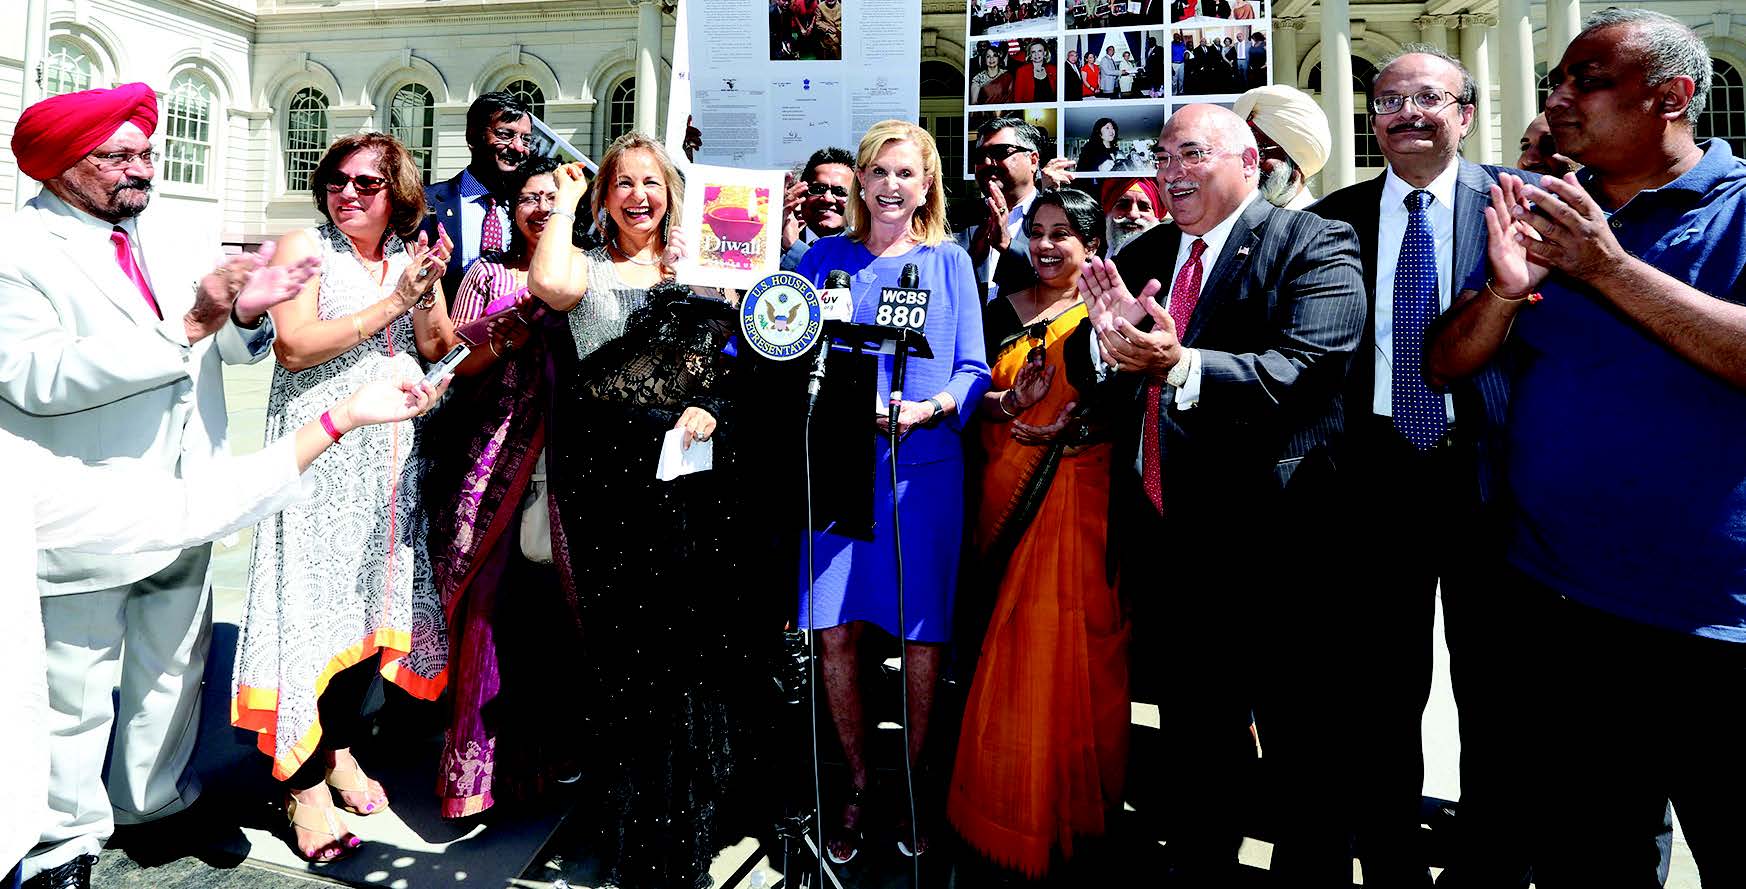 Congresswoman Carolyn Maloney and Diwali Stamp Project Chairperson Ranju Batra announced that the Diwali Stamp will be unveiled on October 5 at the Indian Consulate. Seen in the picture, from L to R: Prof. Indrajit Saluja, Neeta Bhasin, Rajeev Sharma, Vandana Sharma, Regional Manager Air India, Ranju Batra, Congresswoman Carolyn Maloney, Kamlesh Mehta, Consul General Riva Ganguly Das, Pal Dhillon, Ravi Batra, Harpreet Singh Toor, Sudhir Vaishnav, Srujal Parikh -- Photo/ Mohammed Jaffer-SnapsIndia